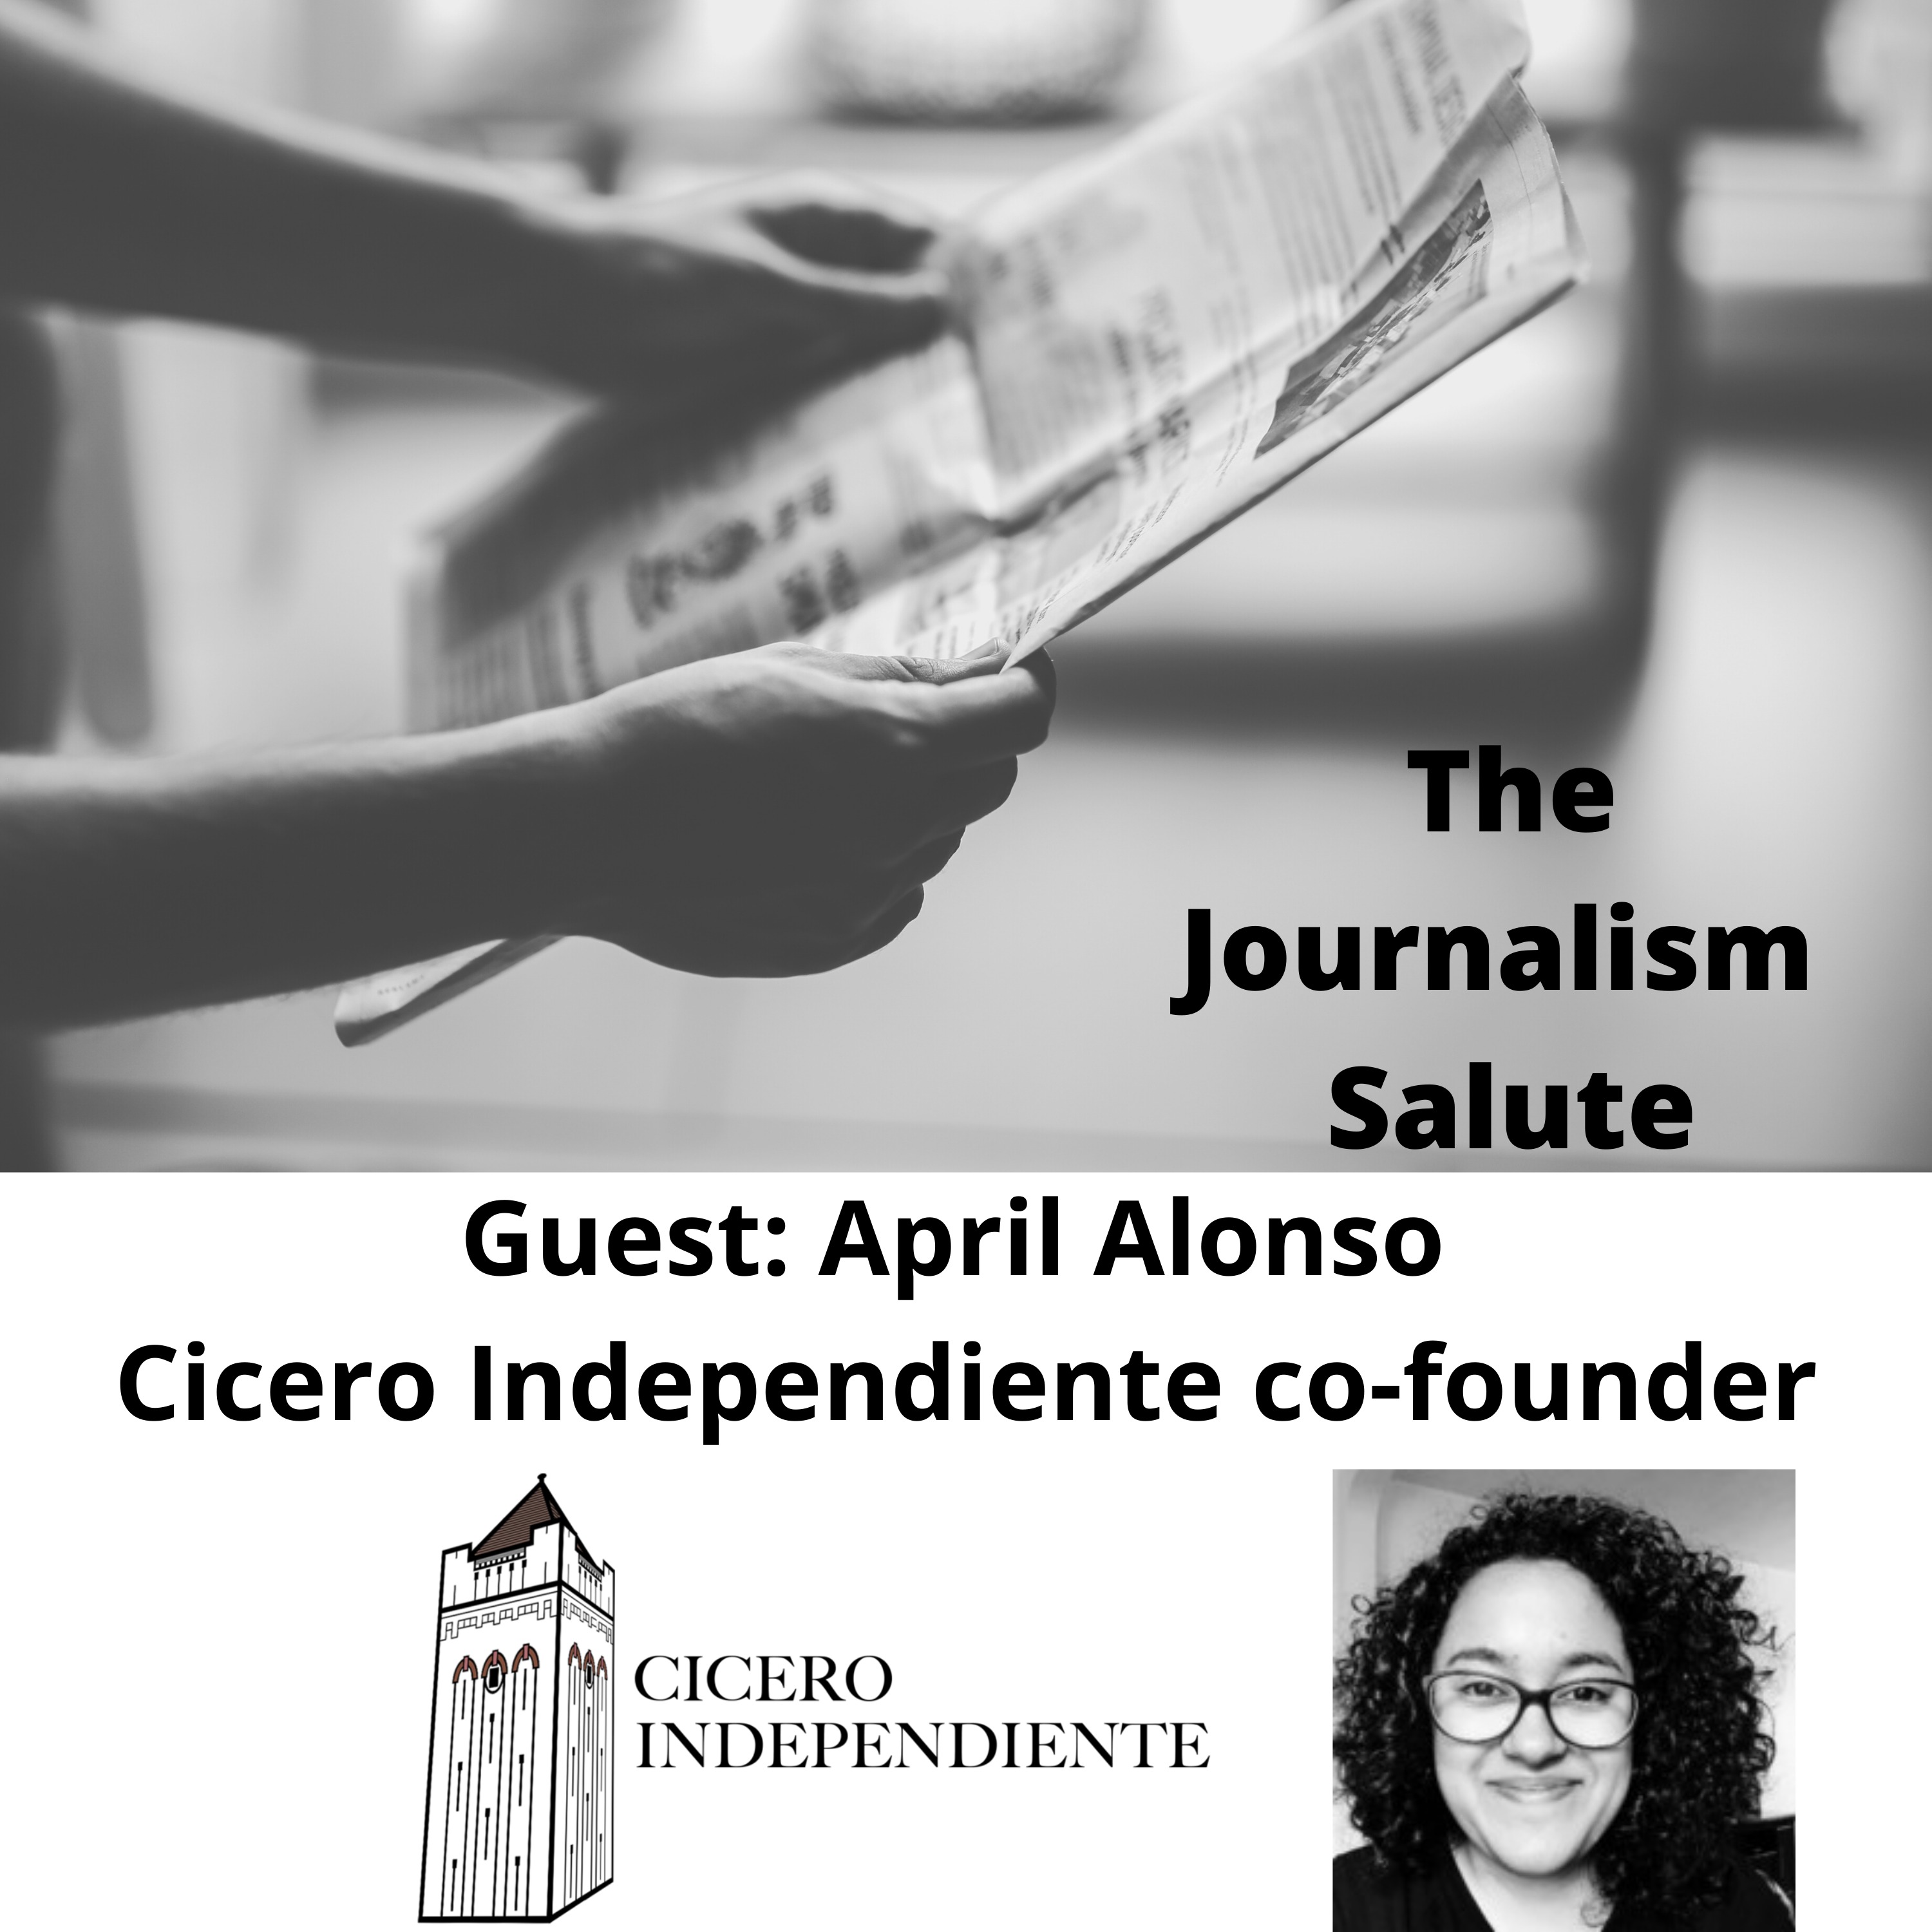 April Alonso of the Award-Winning Cicero Independiente